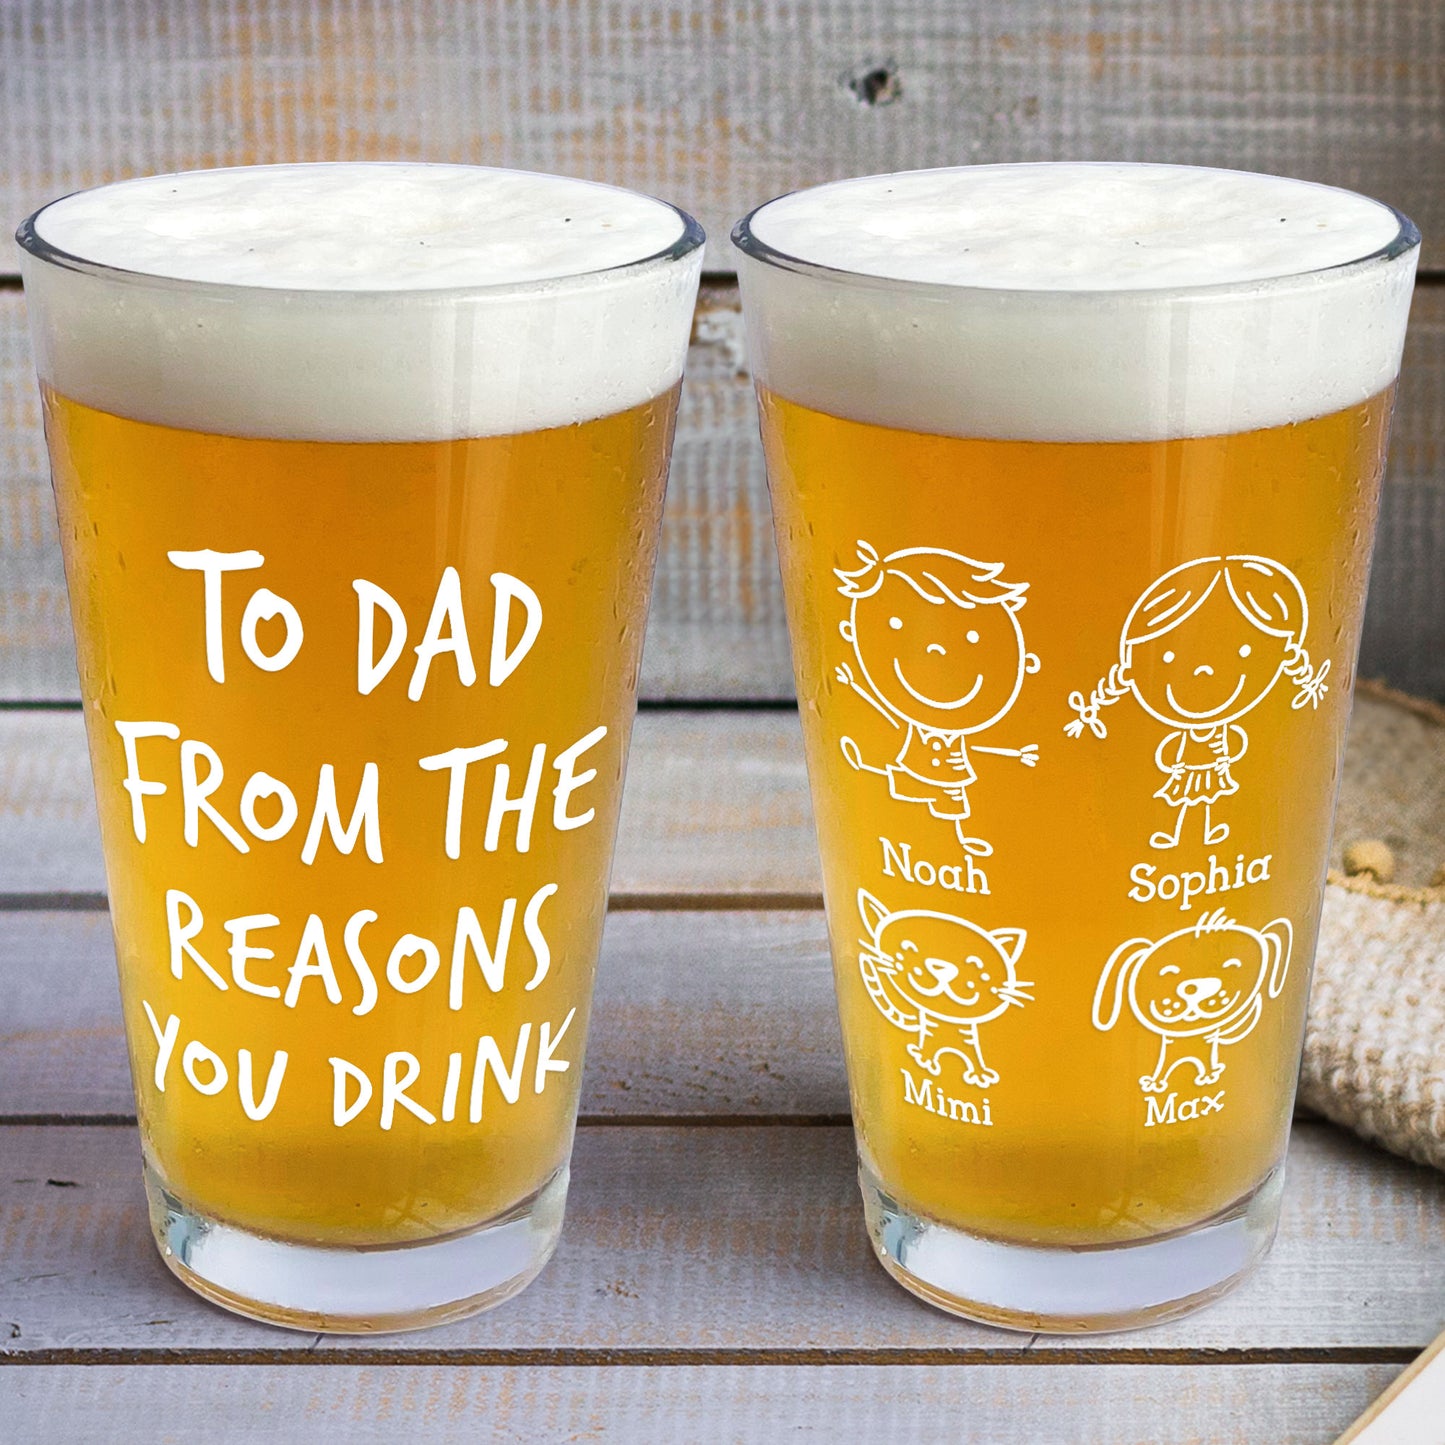 From The Reasons You Drink Father's Day Gifts For Dad - Personalized Beer Glass